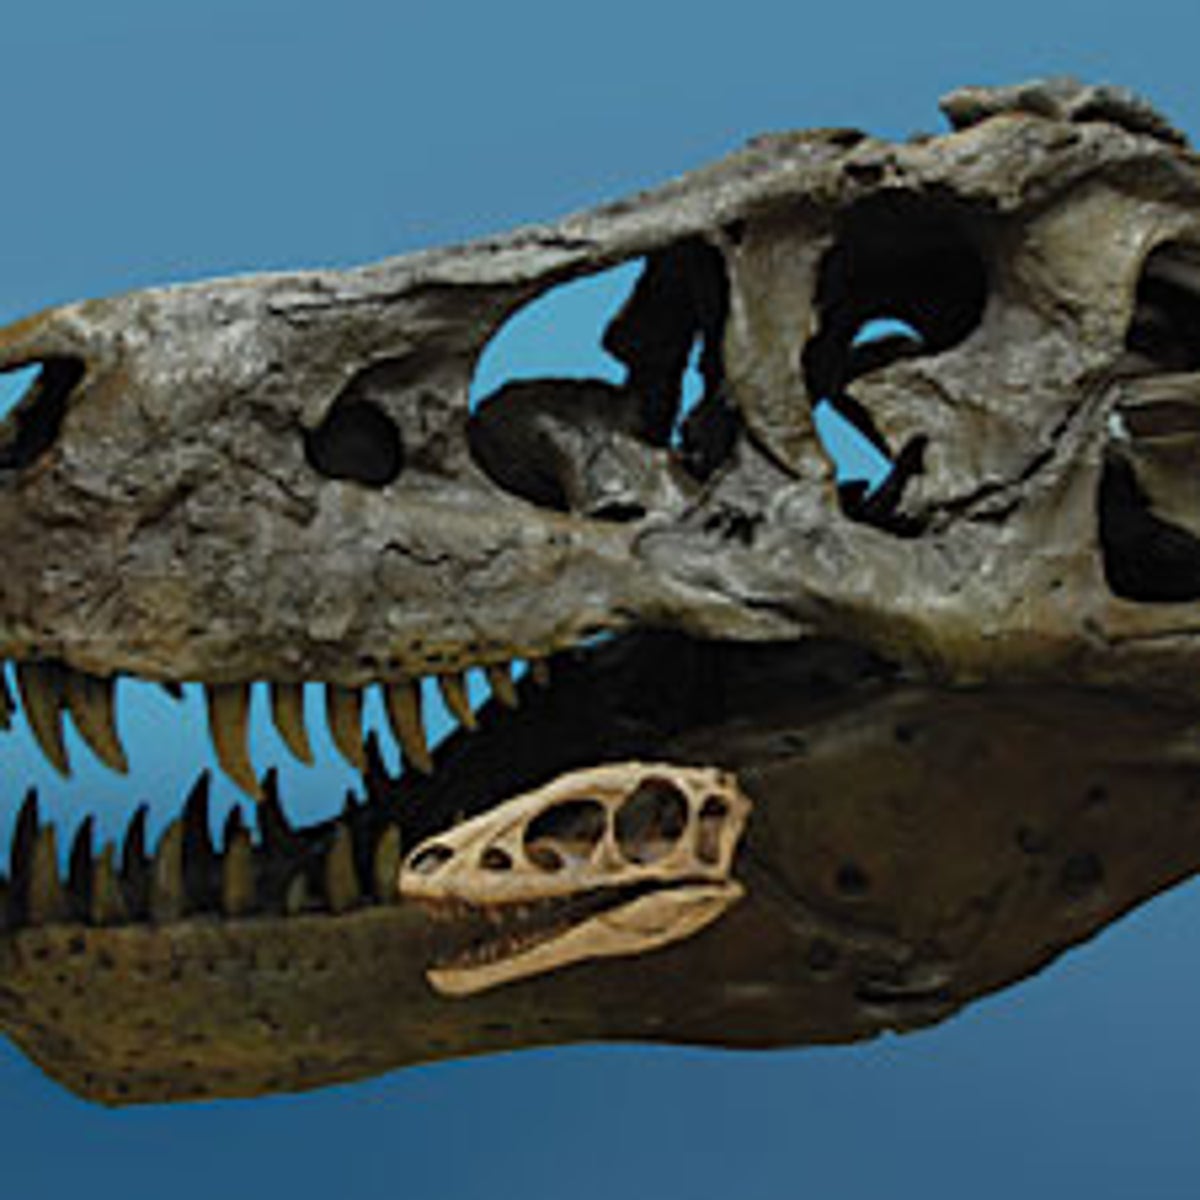 Annotated by the Author: 'Tiny Tyrannosaur Hints at How T. Rex